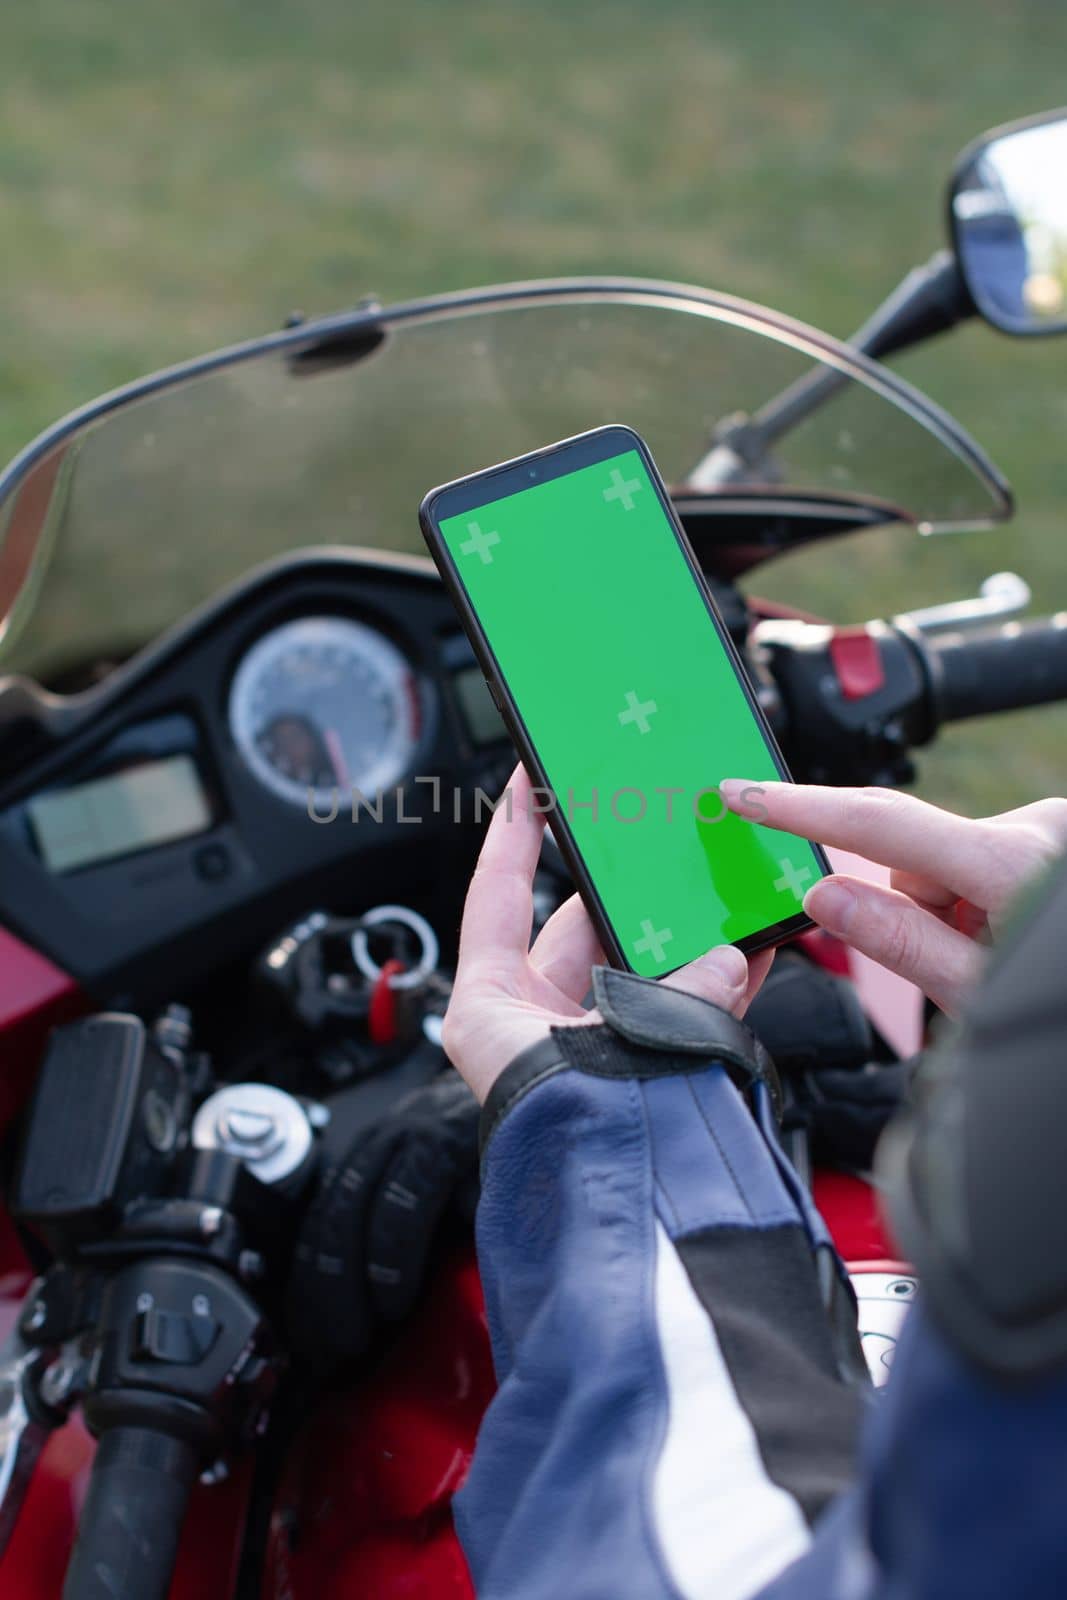 biker girl on a motorcycle enjoys a navigator in a mobile phone, a reflection in the rearview mirror, High quality photo